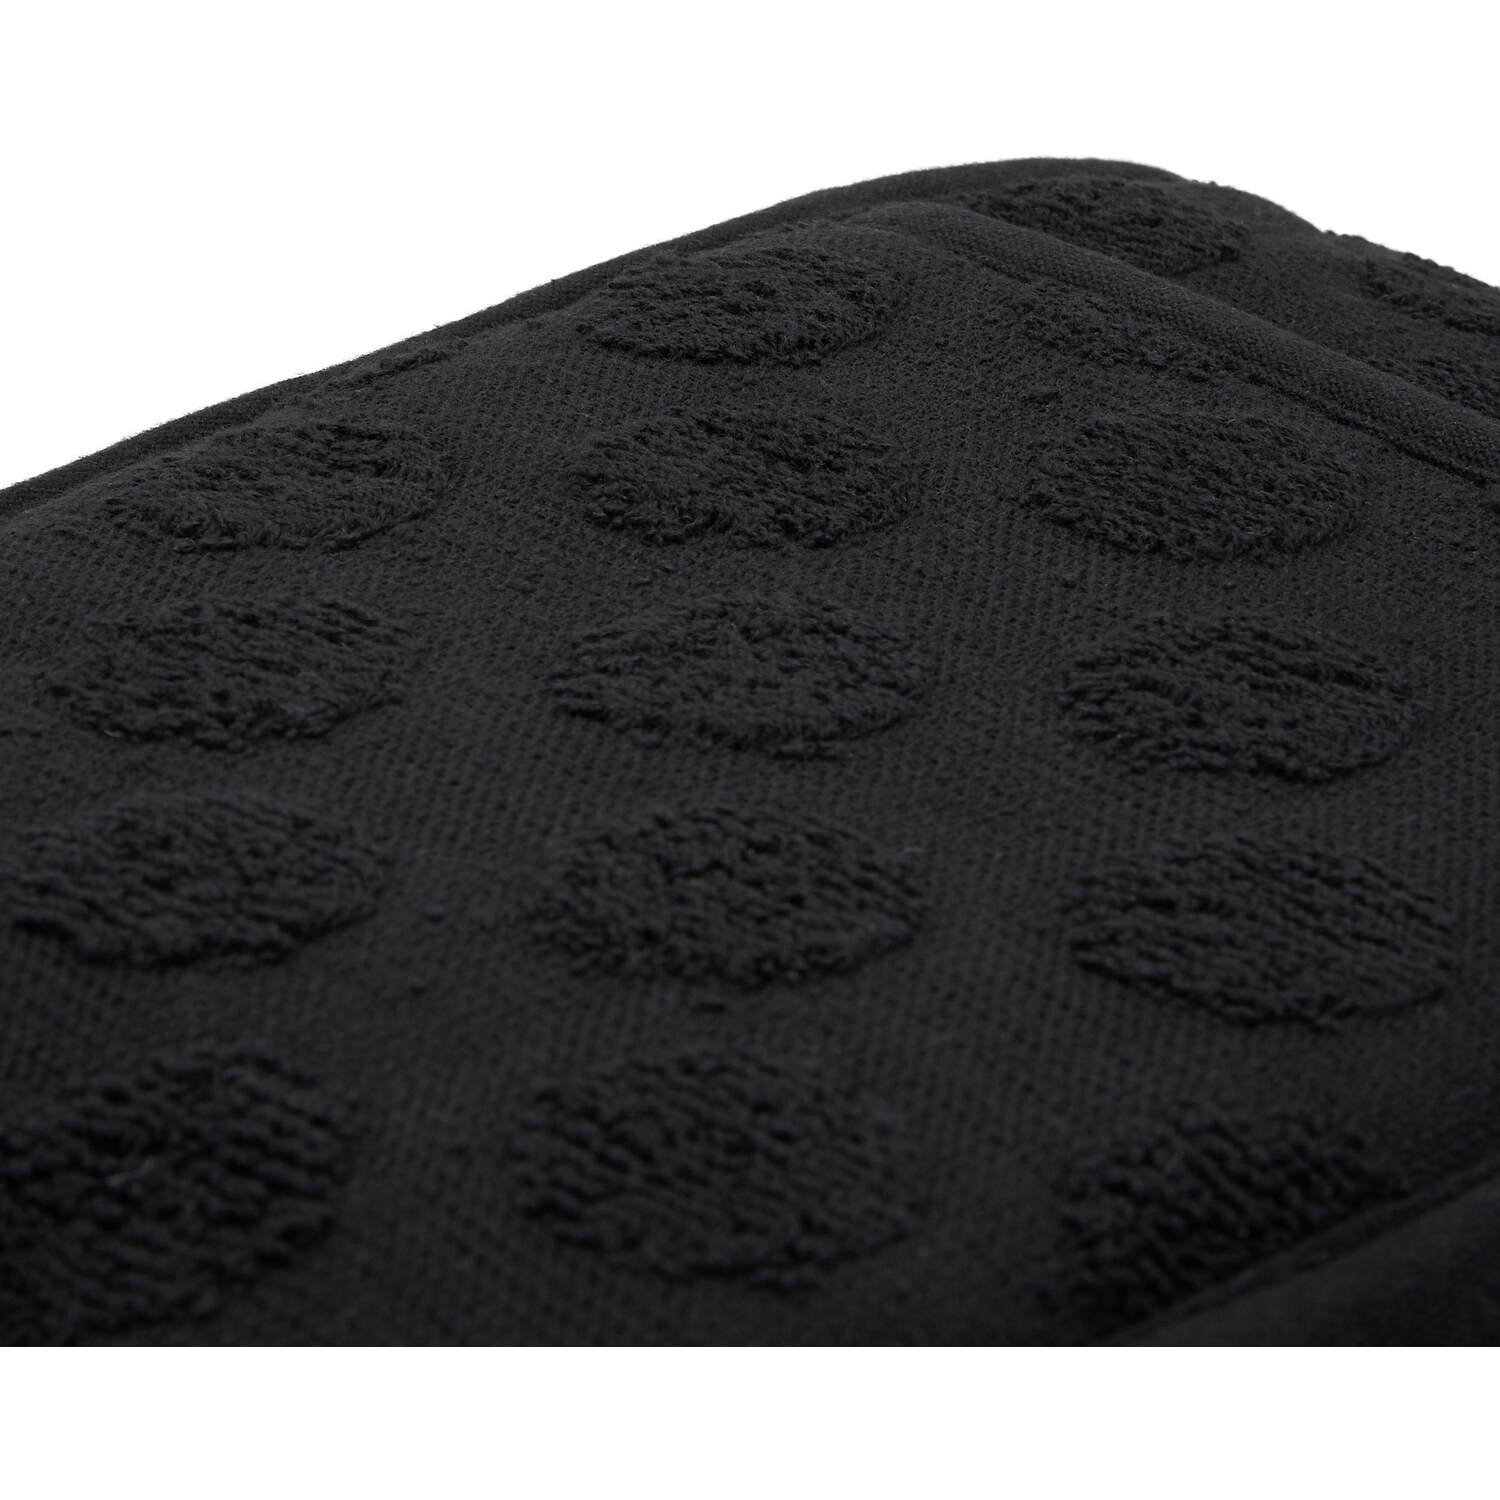 Dobby Terry Double Oven Glove - Black Image 4